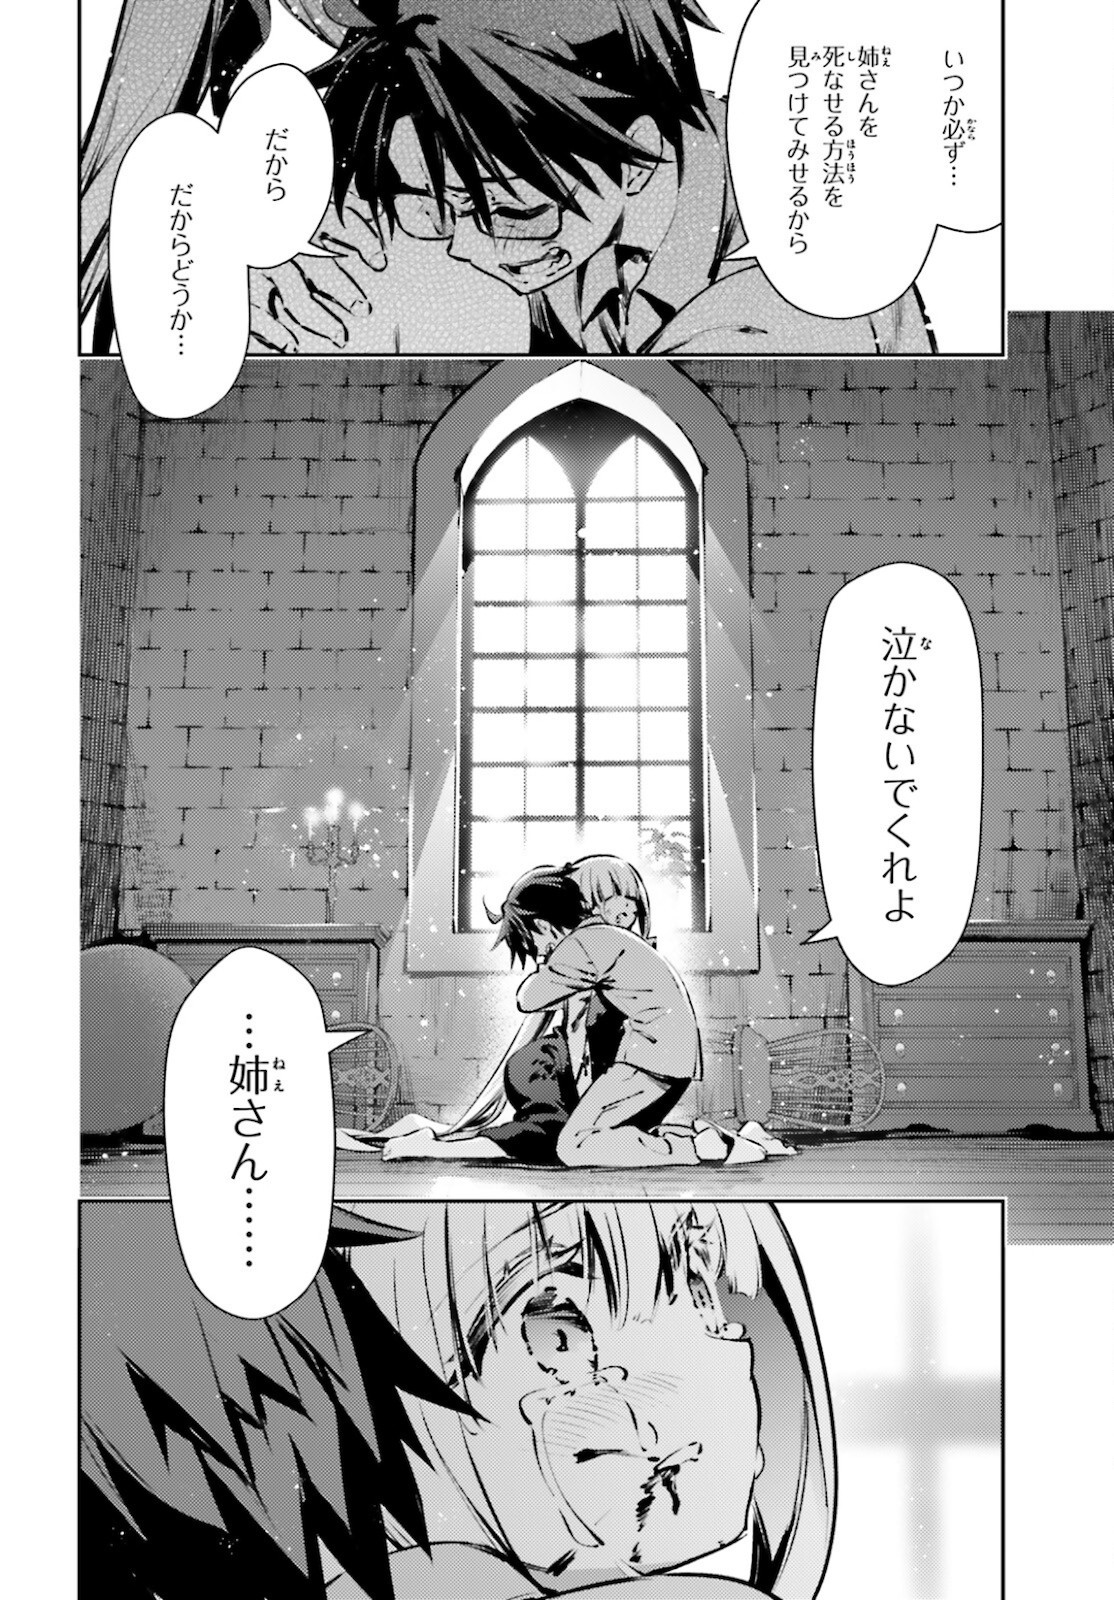 Fate/Kaleid Liner Prisma Illya Drei! - Chapter 63 - Page 4